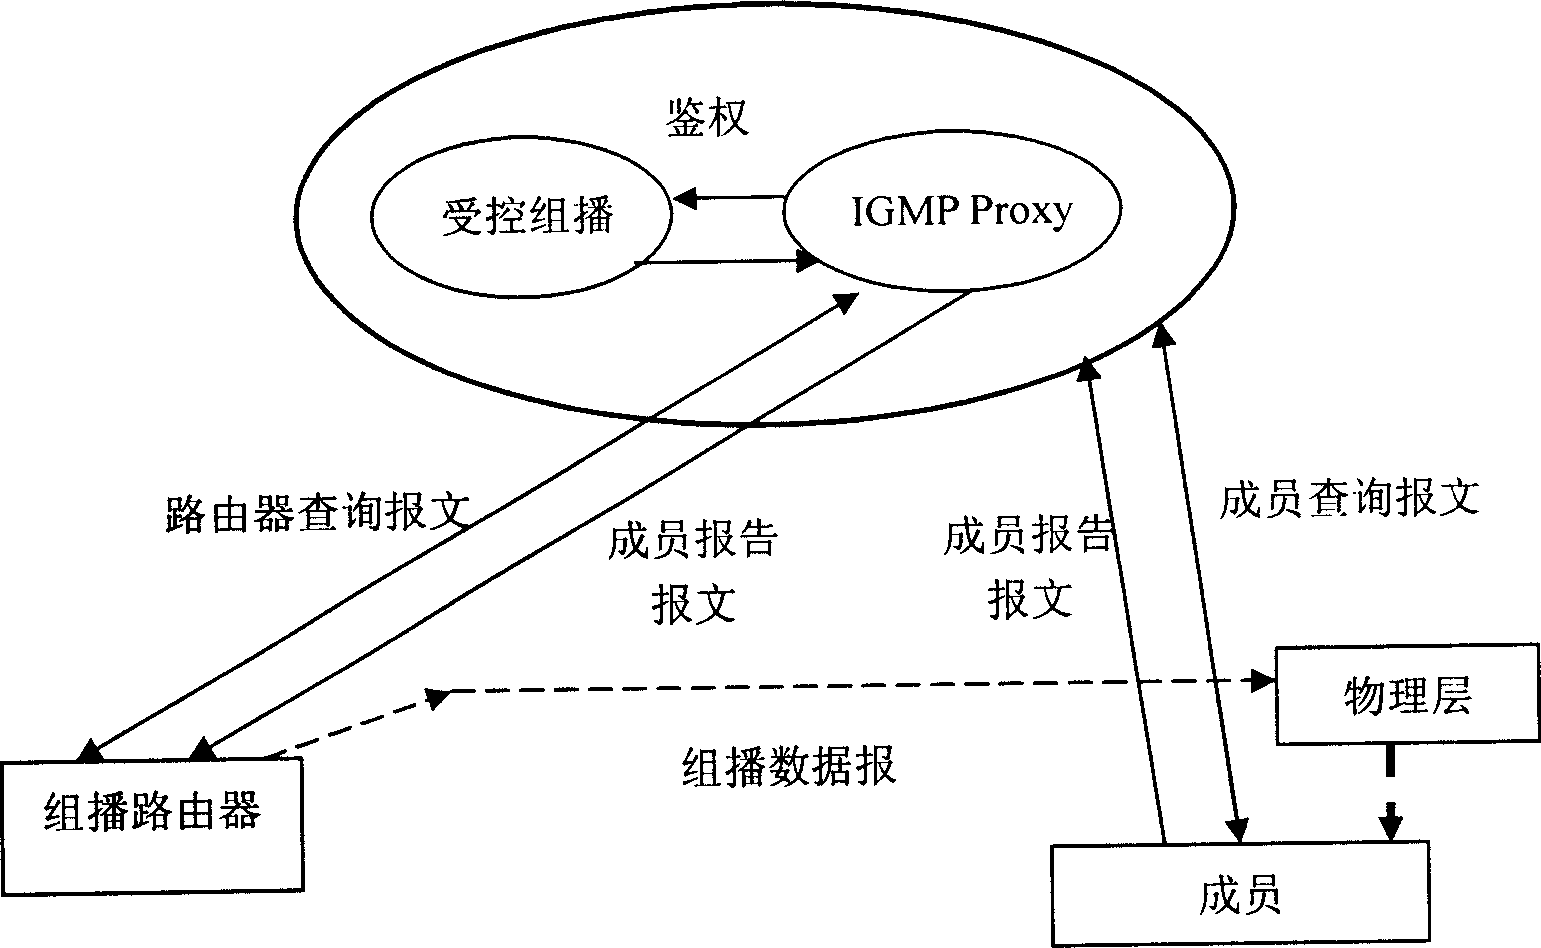 Method for realizing simplified IGMP multicast surrogate